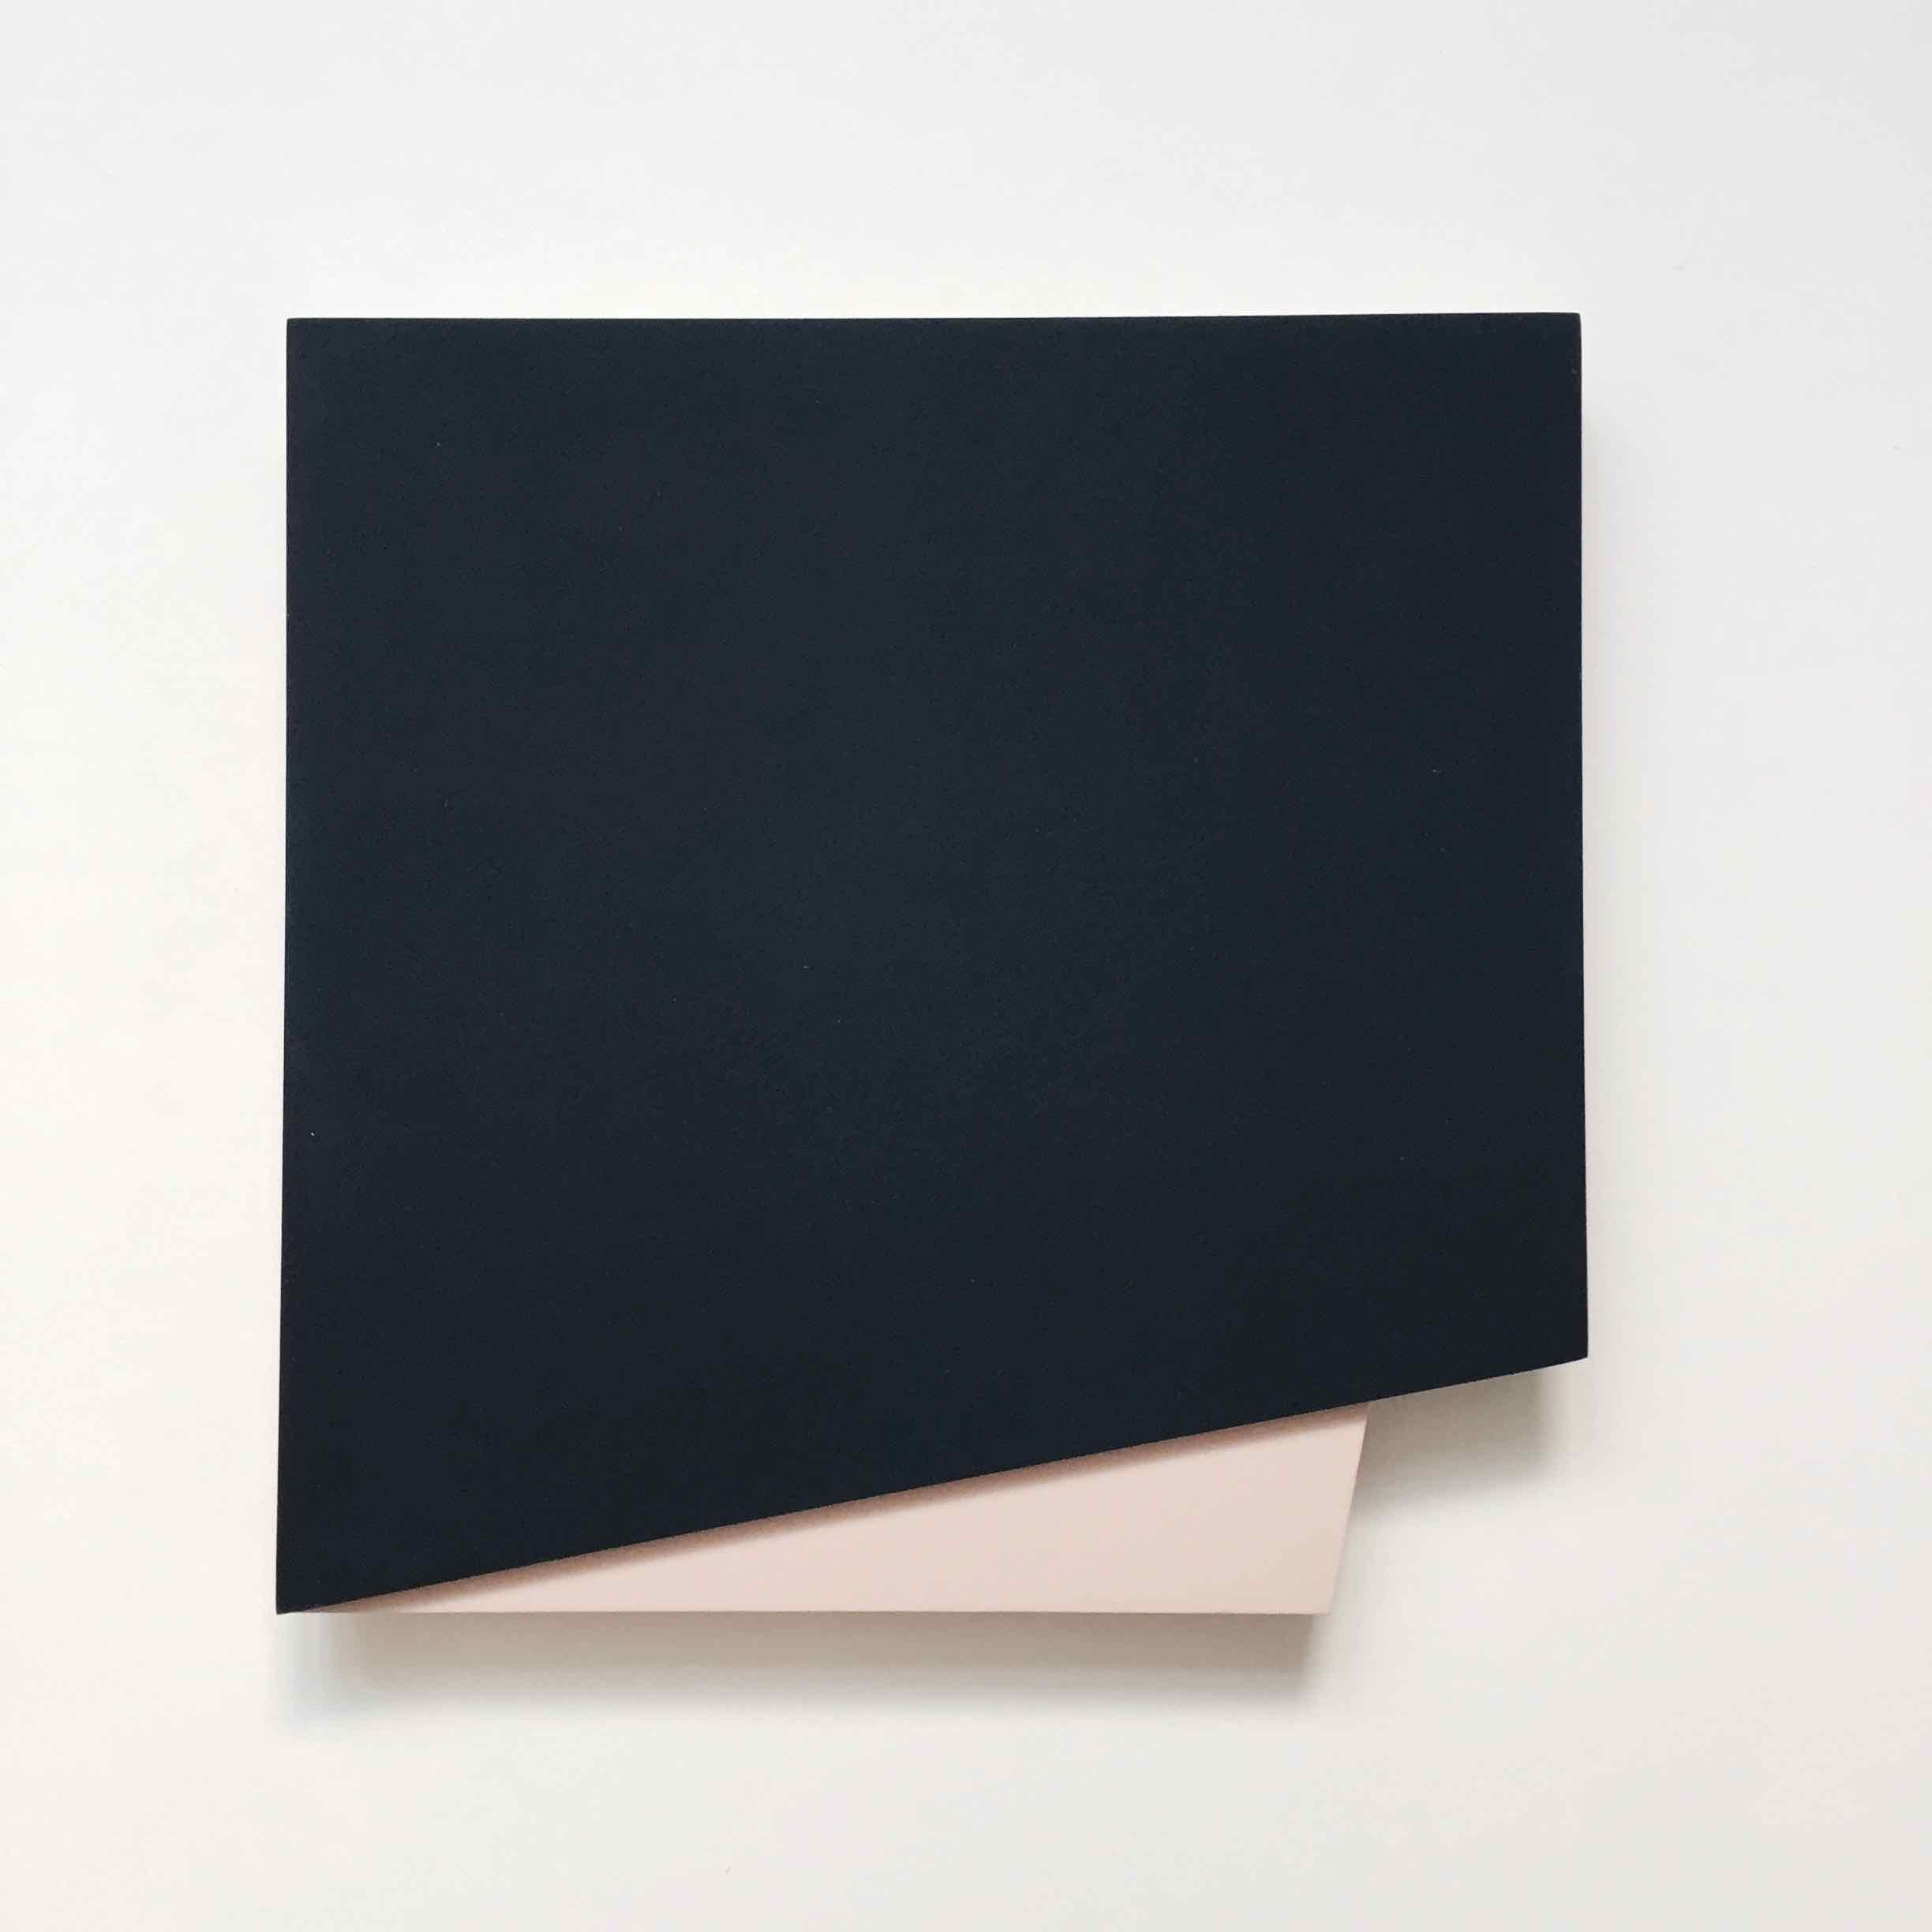 'Cut-out 20': Four Minimal Hard Edge Abstract Paintings by Laura Jane Scott 5